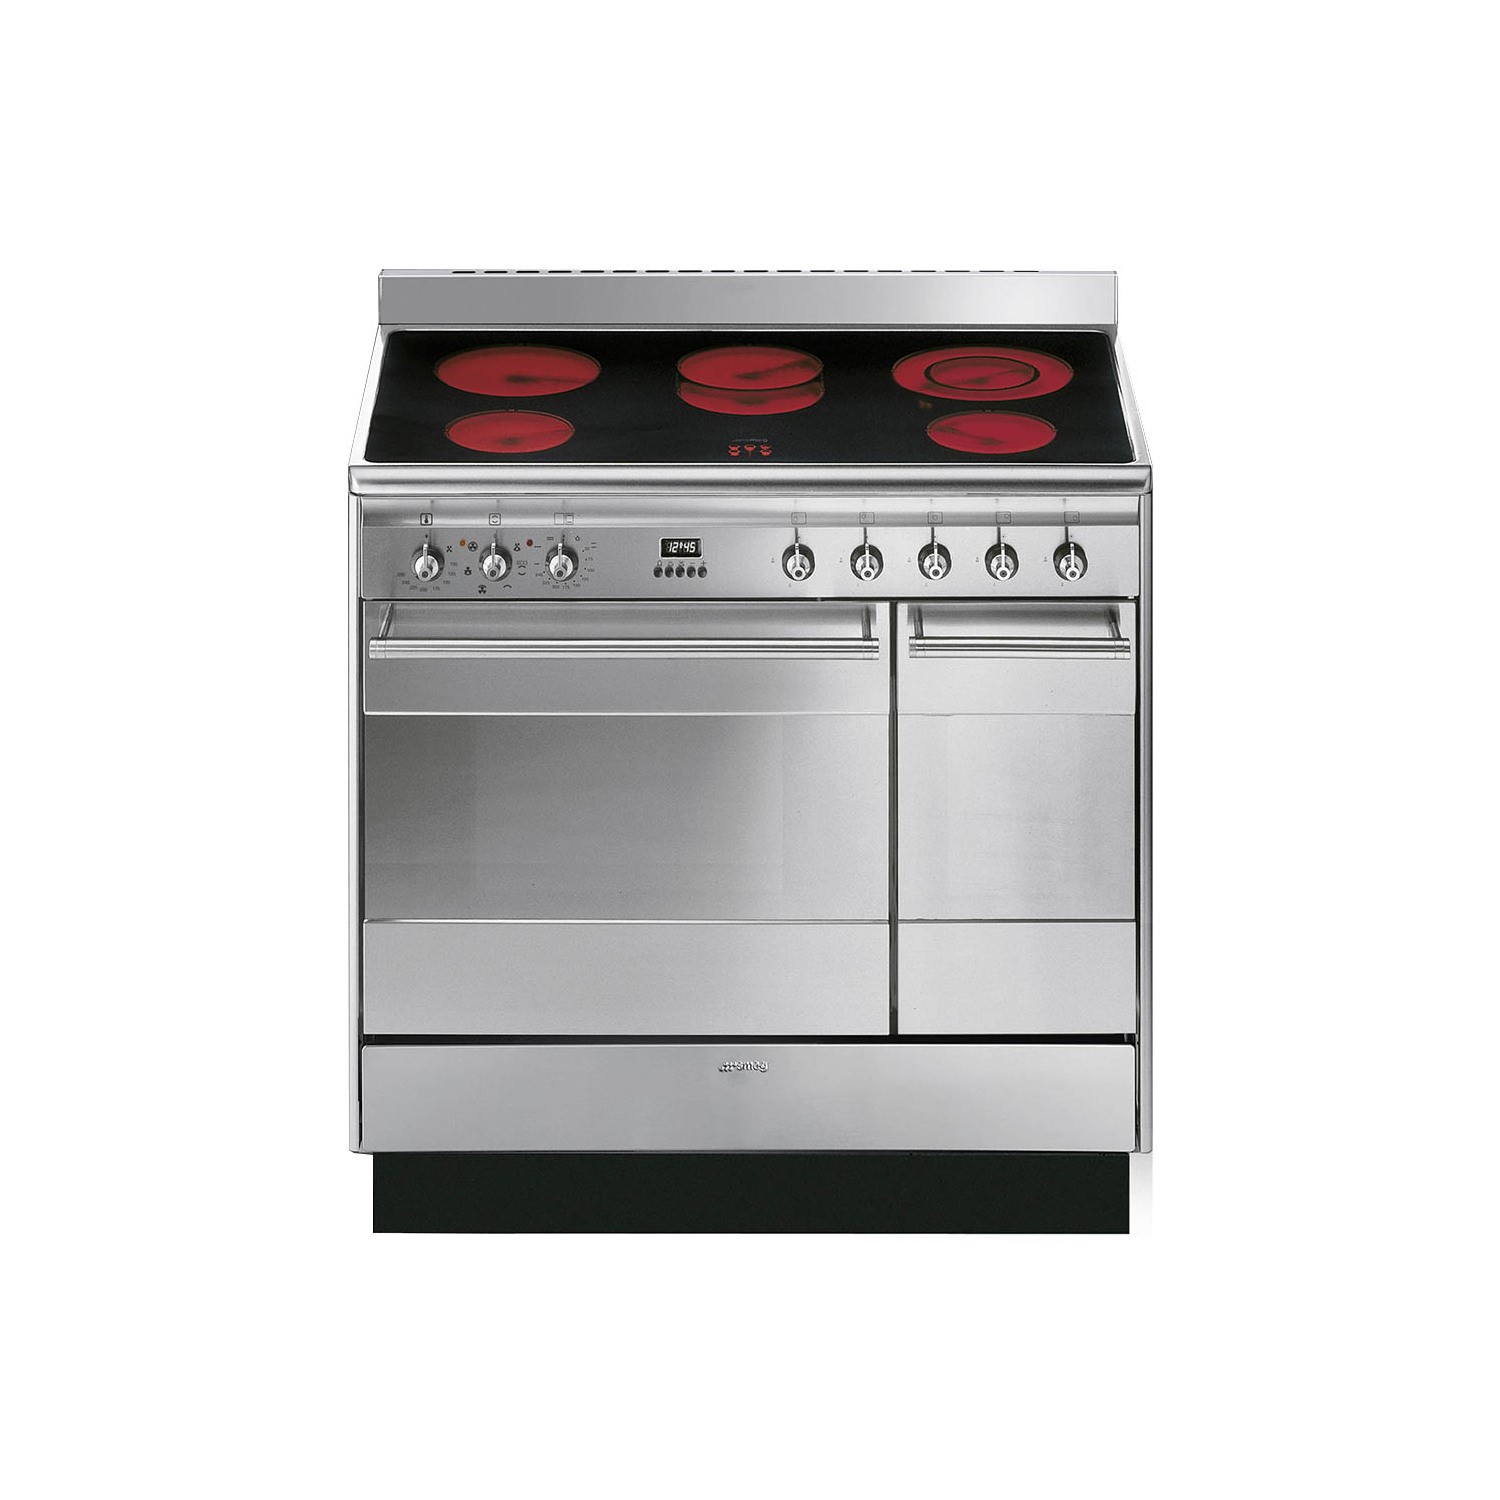 Smeg Concert 90cm Electric Range Cooker with Ceramic Hob - Stainless Steel